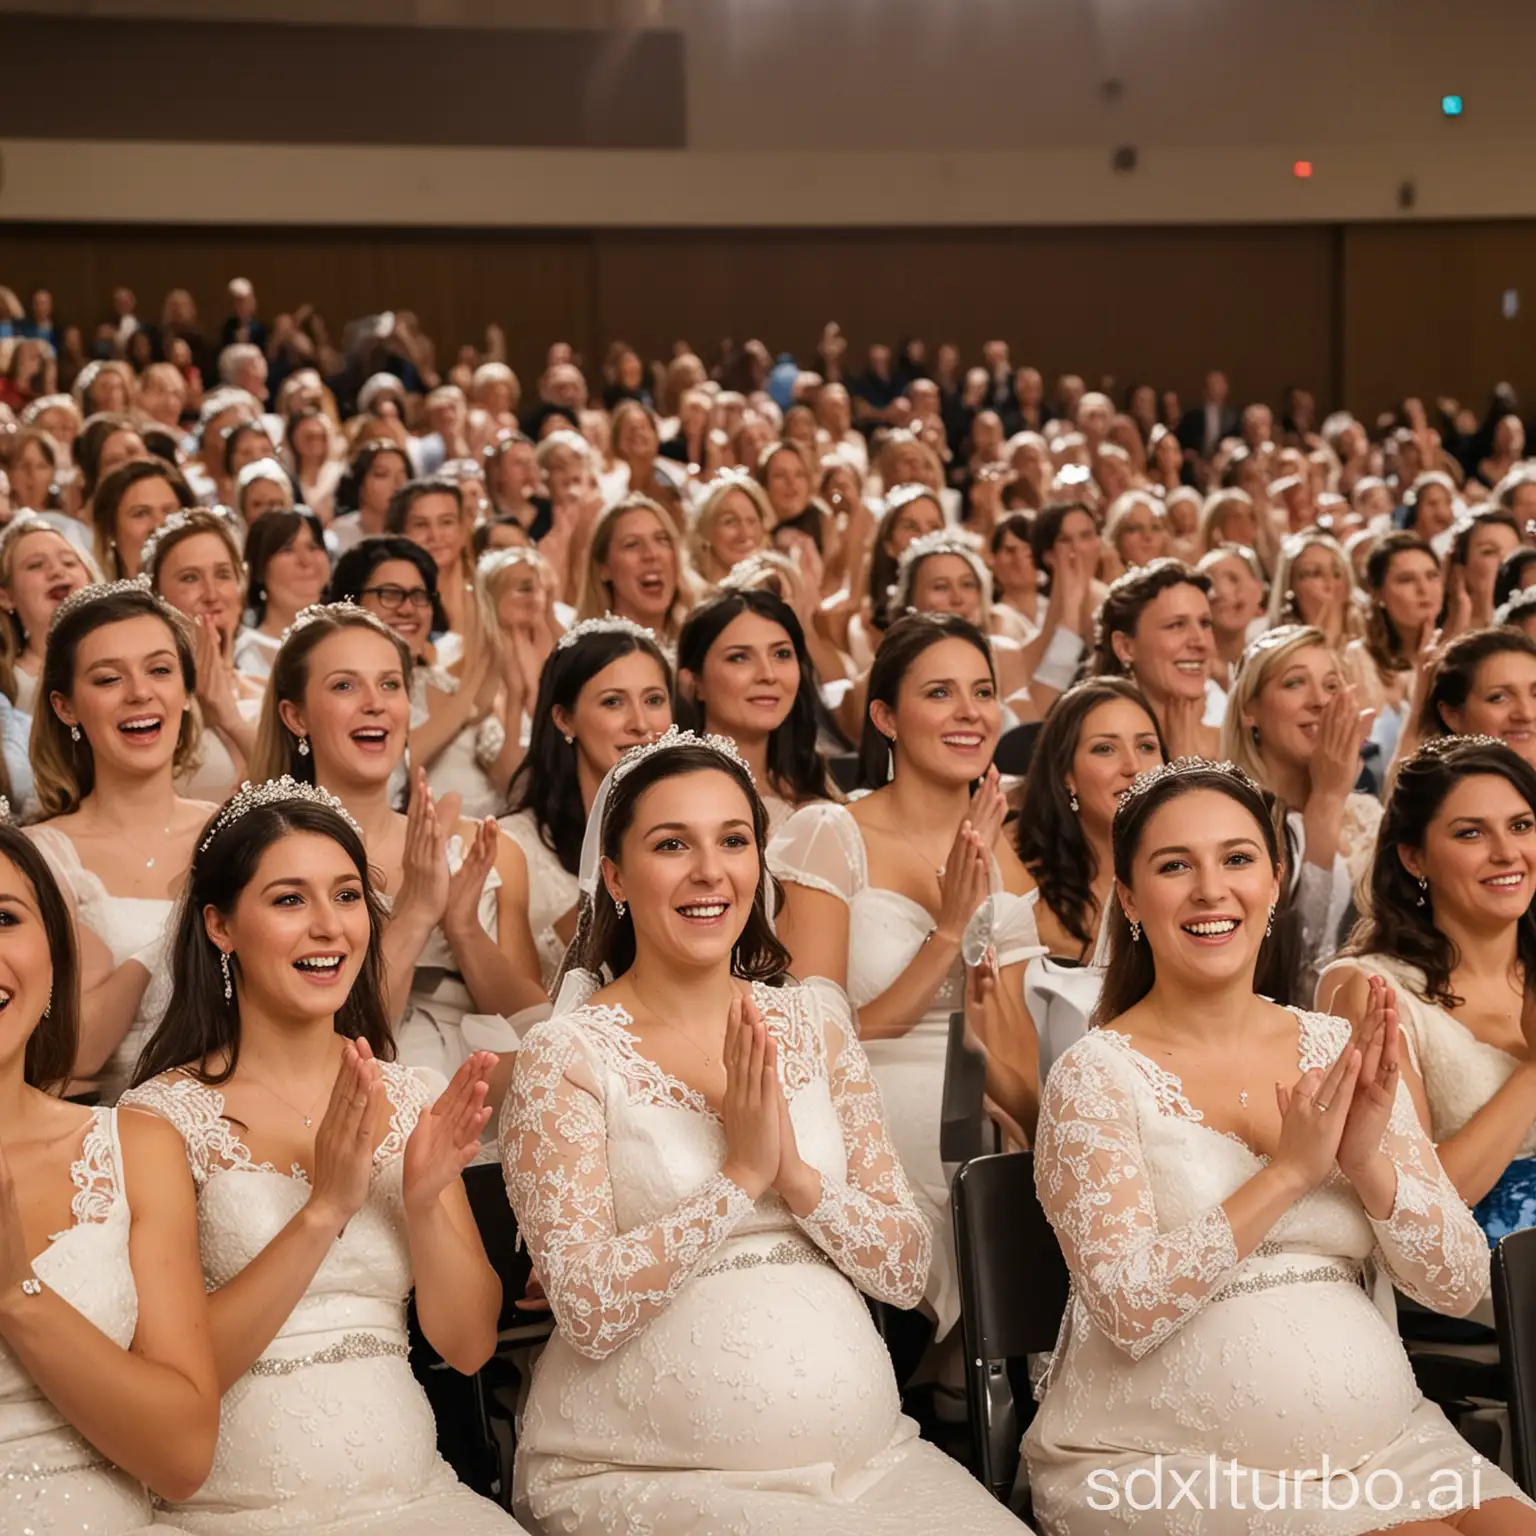 Auditorium filled with pregnant brides clapping